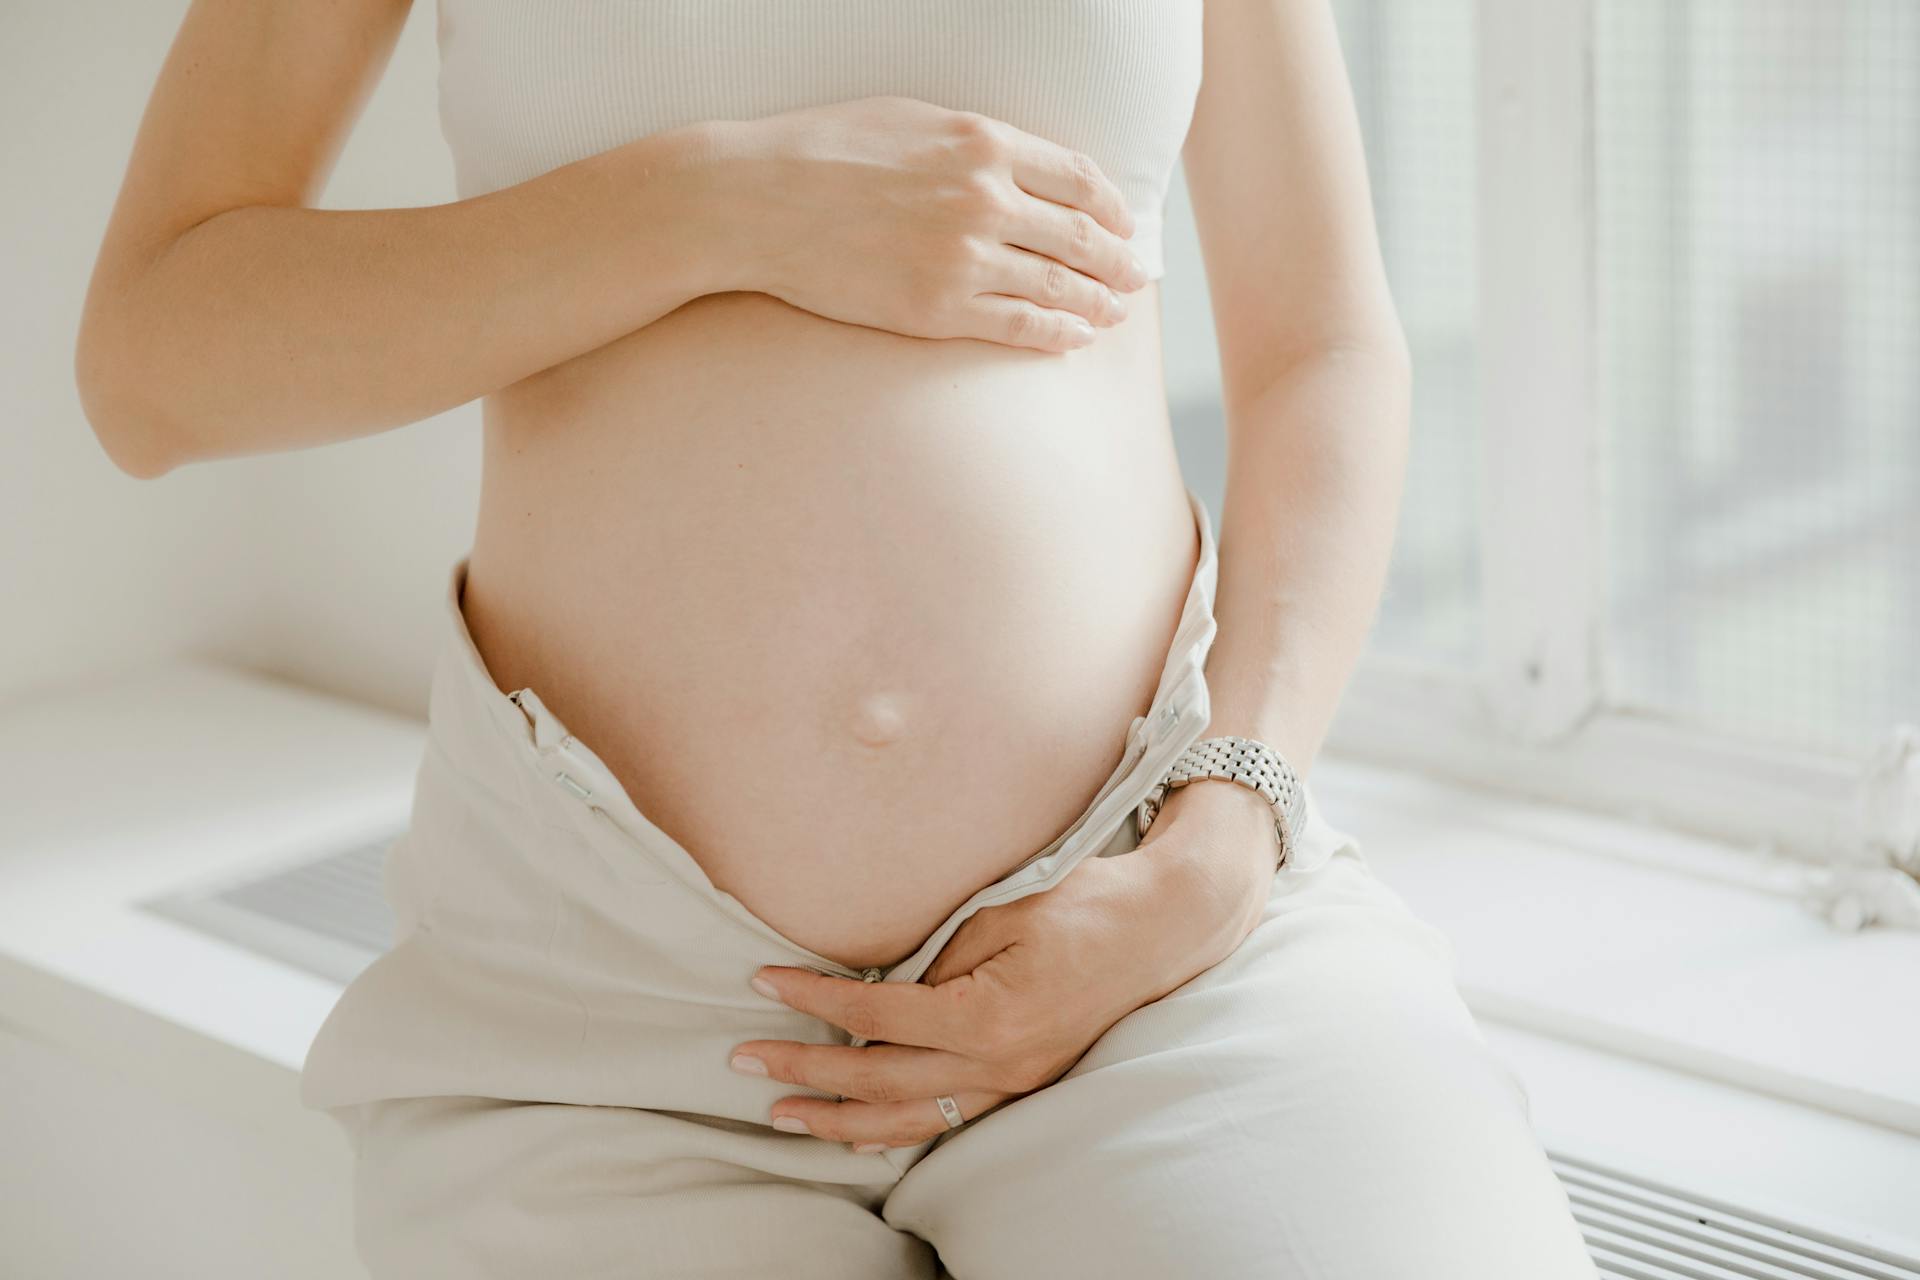 What Is Obstetric Dermatology?